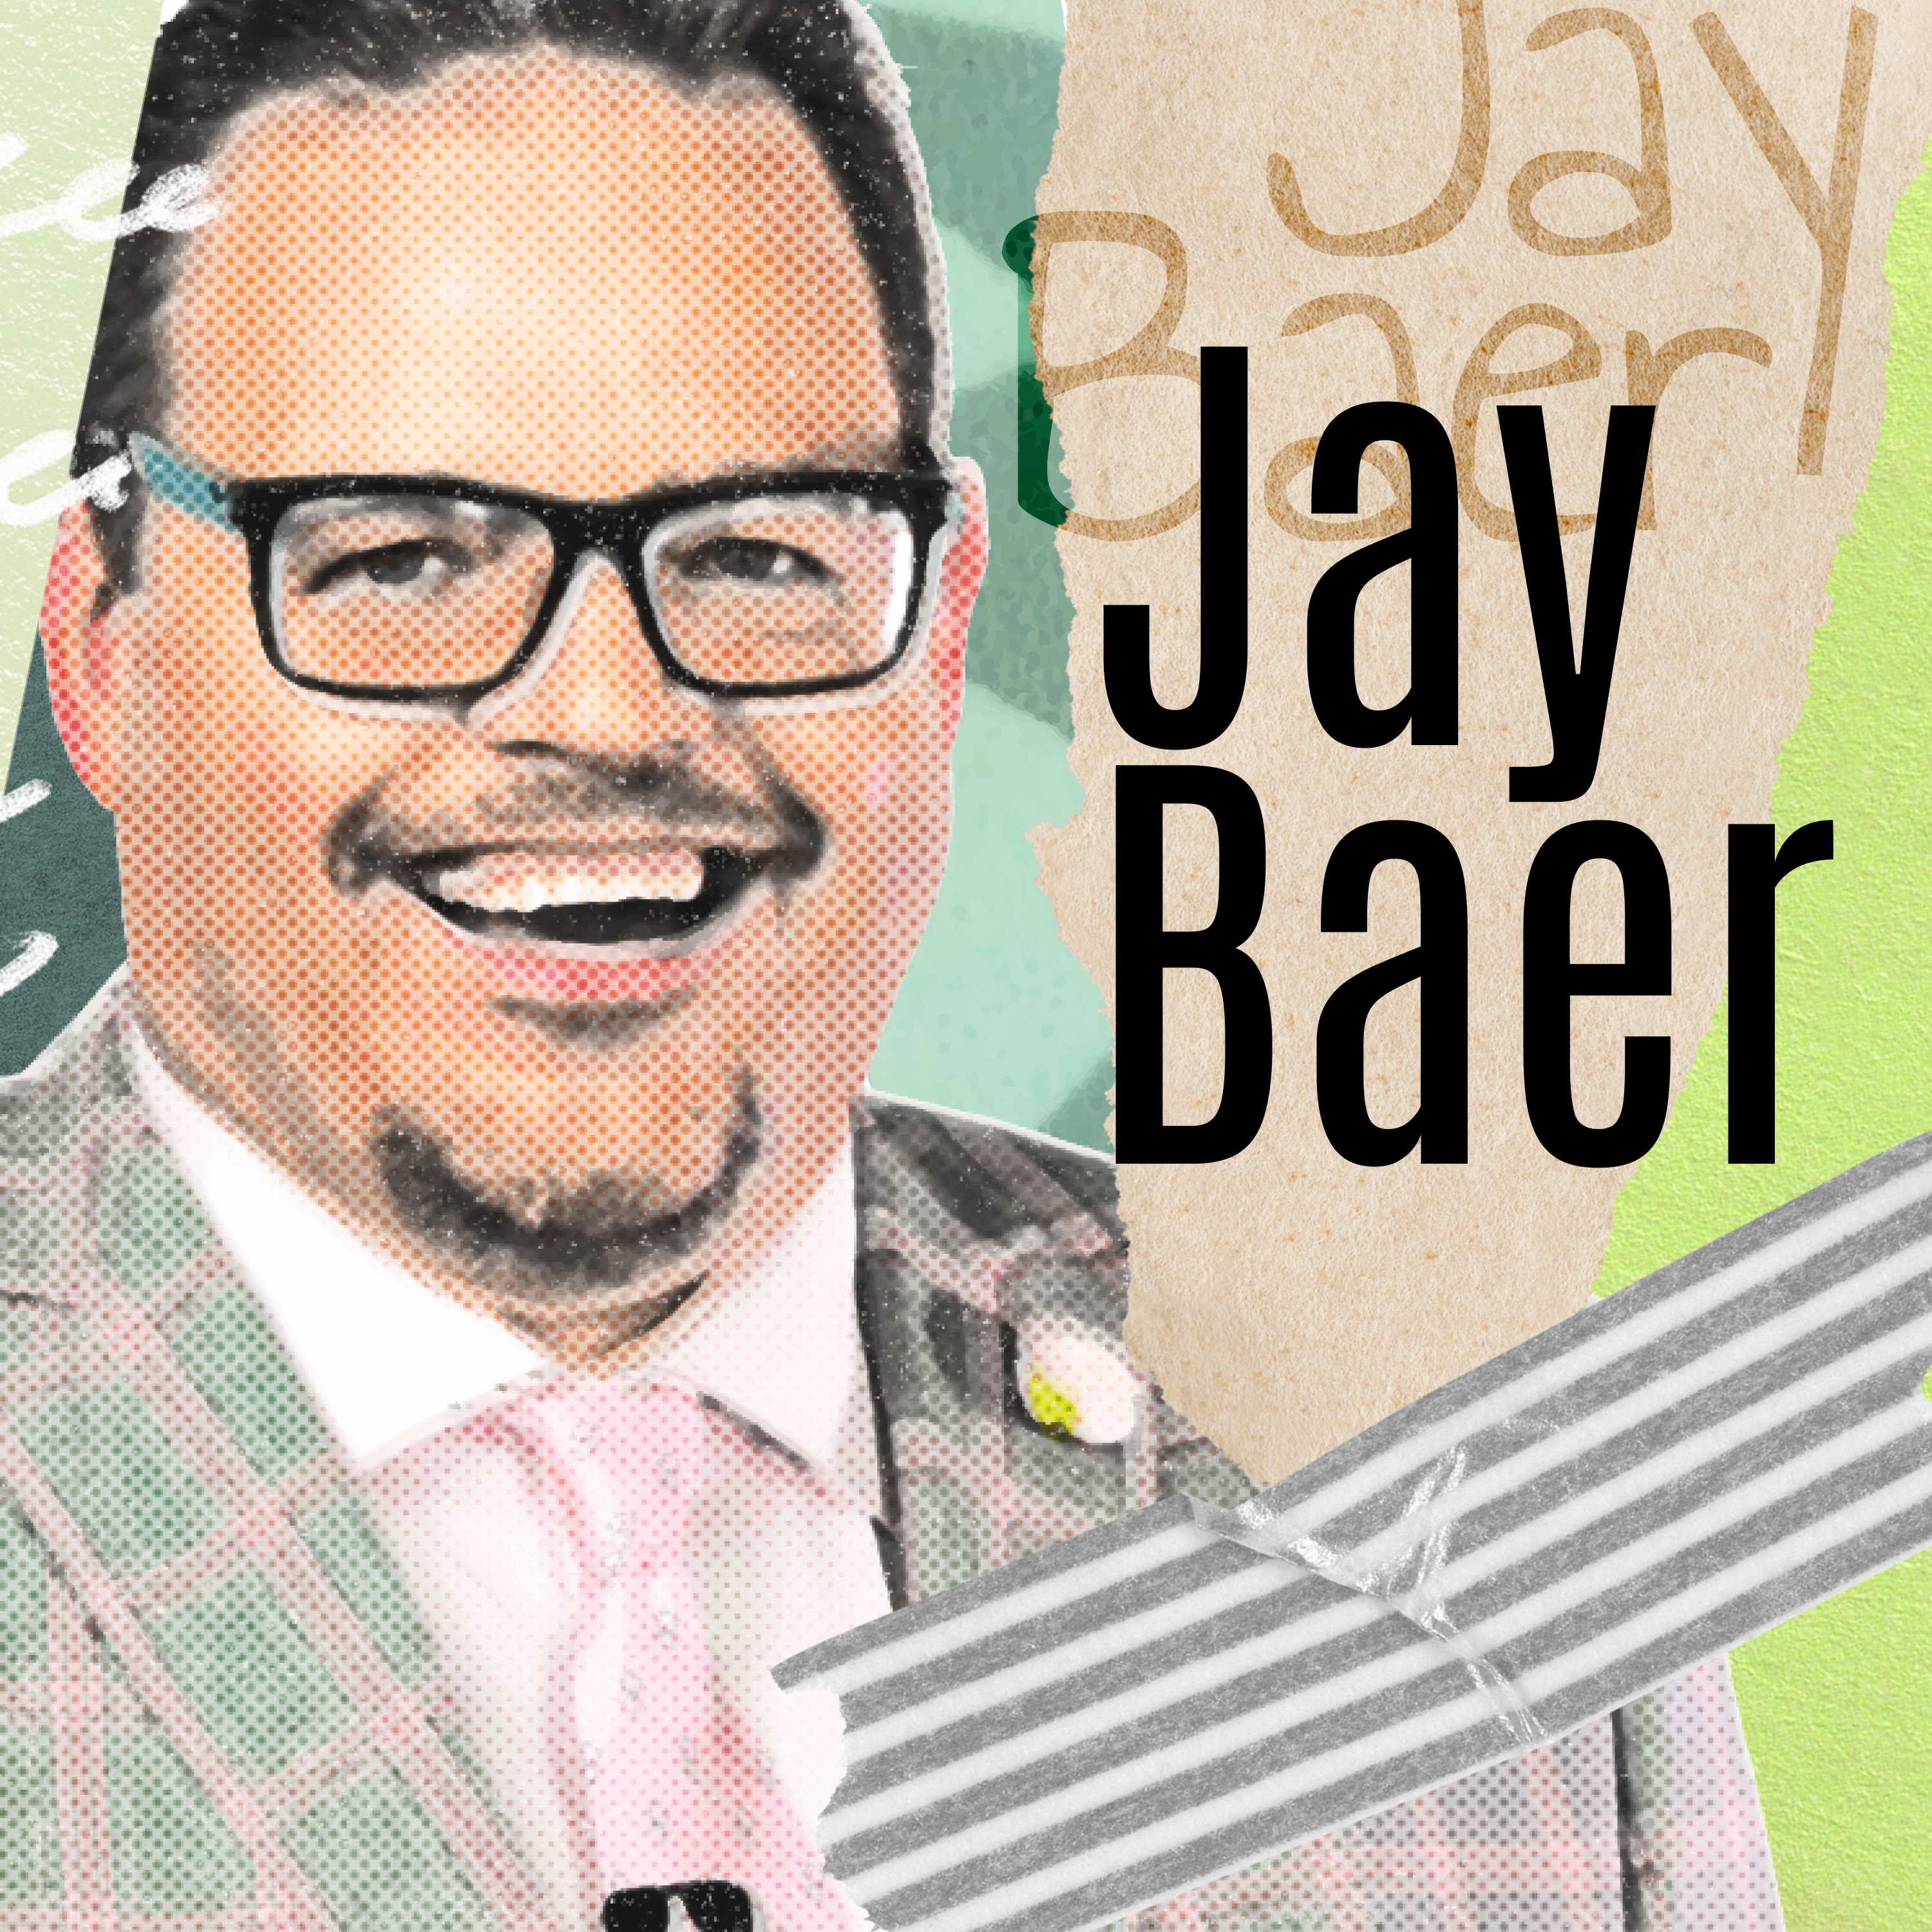 CX expert Jay Baer on creating experiences that get your customers talking